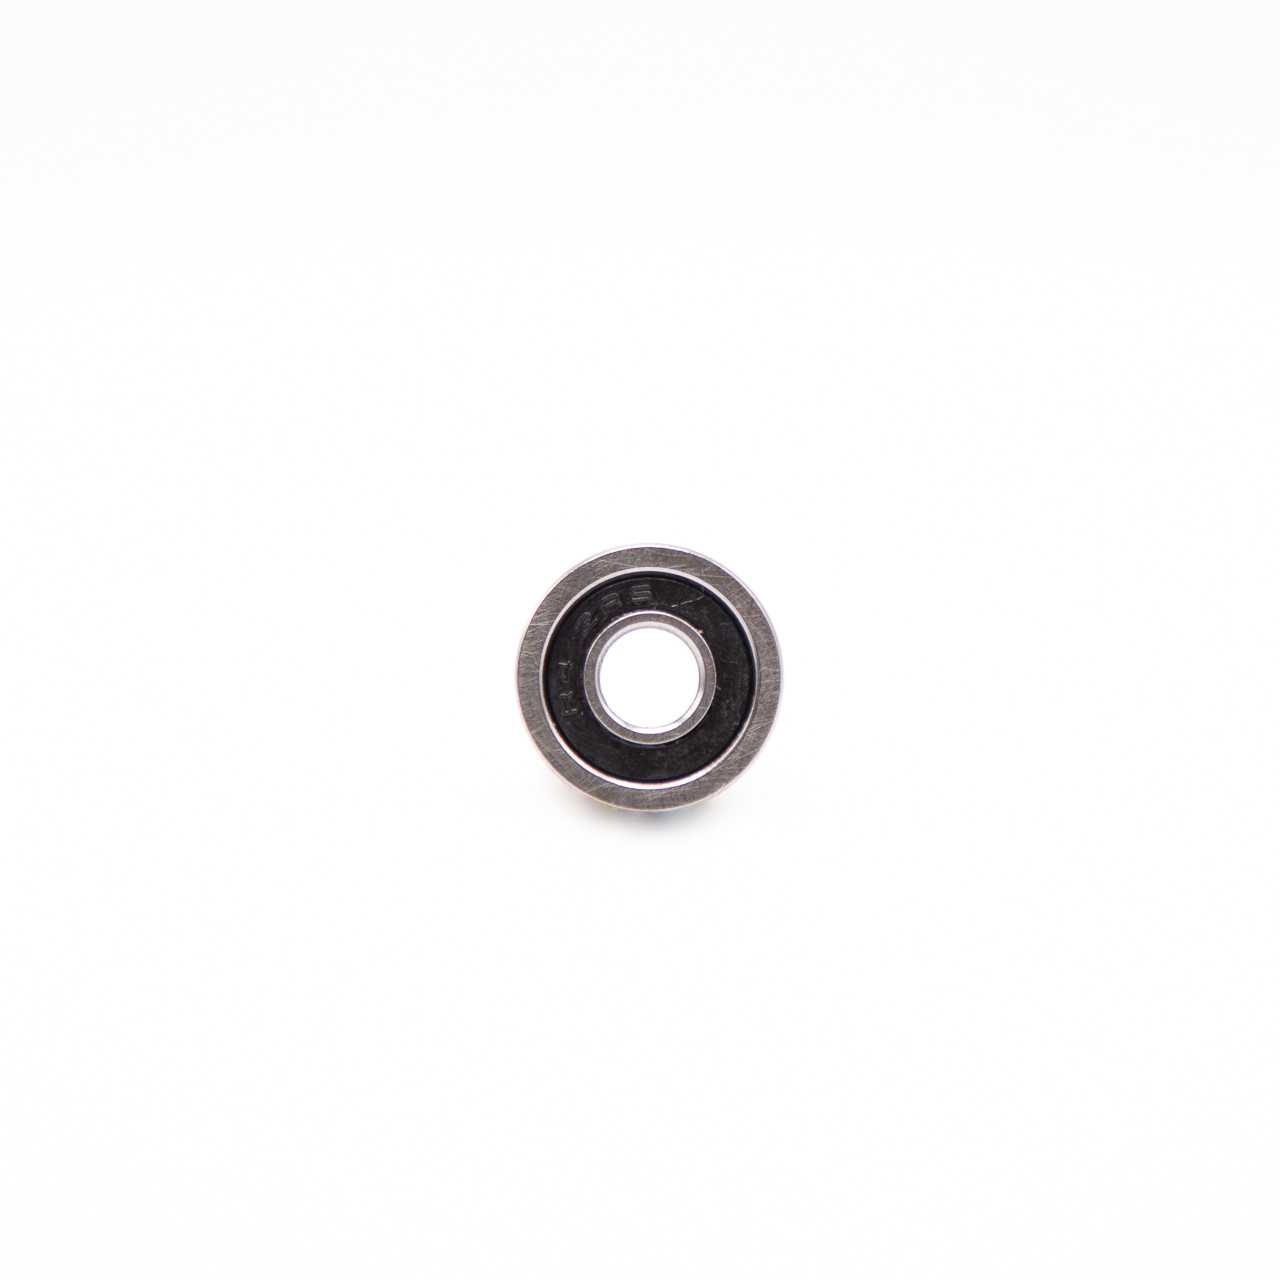 F635-2RS Miniature Flanged Ball Bearing 5x19x6 Front View